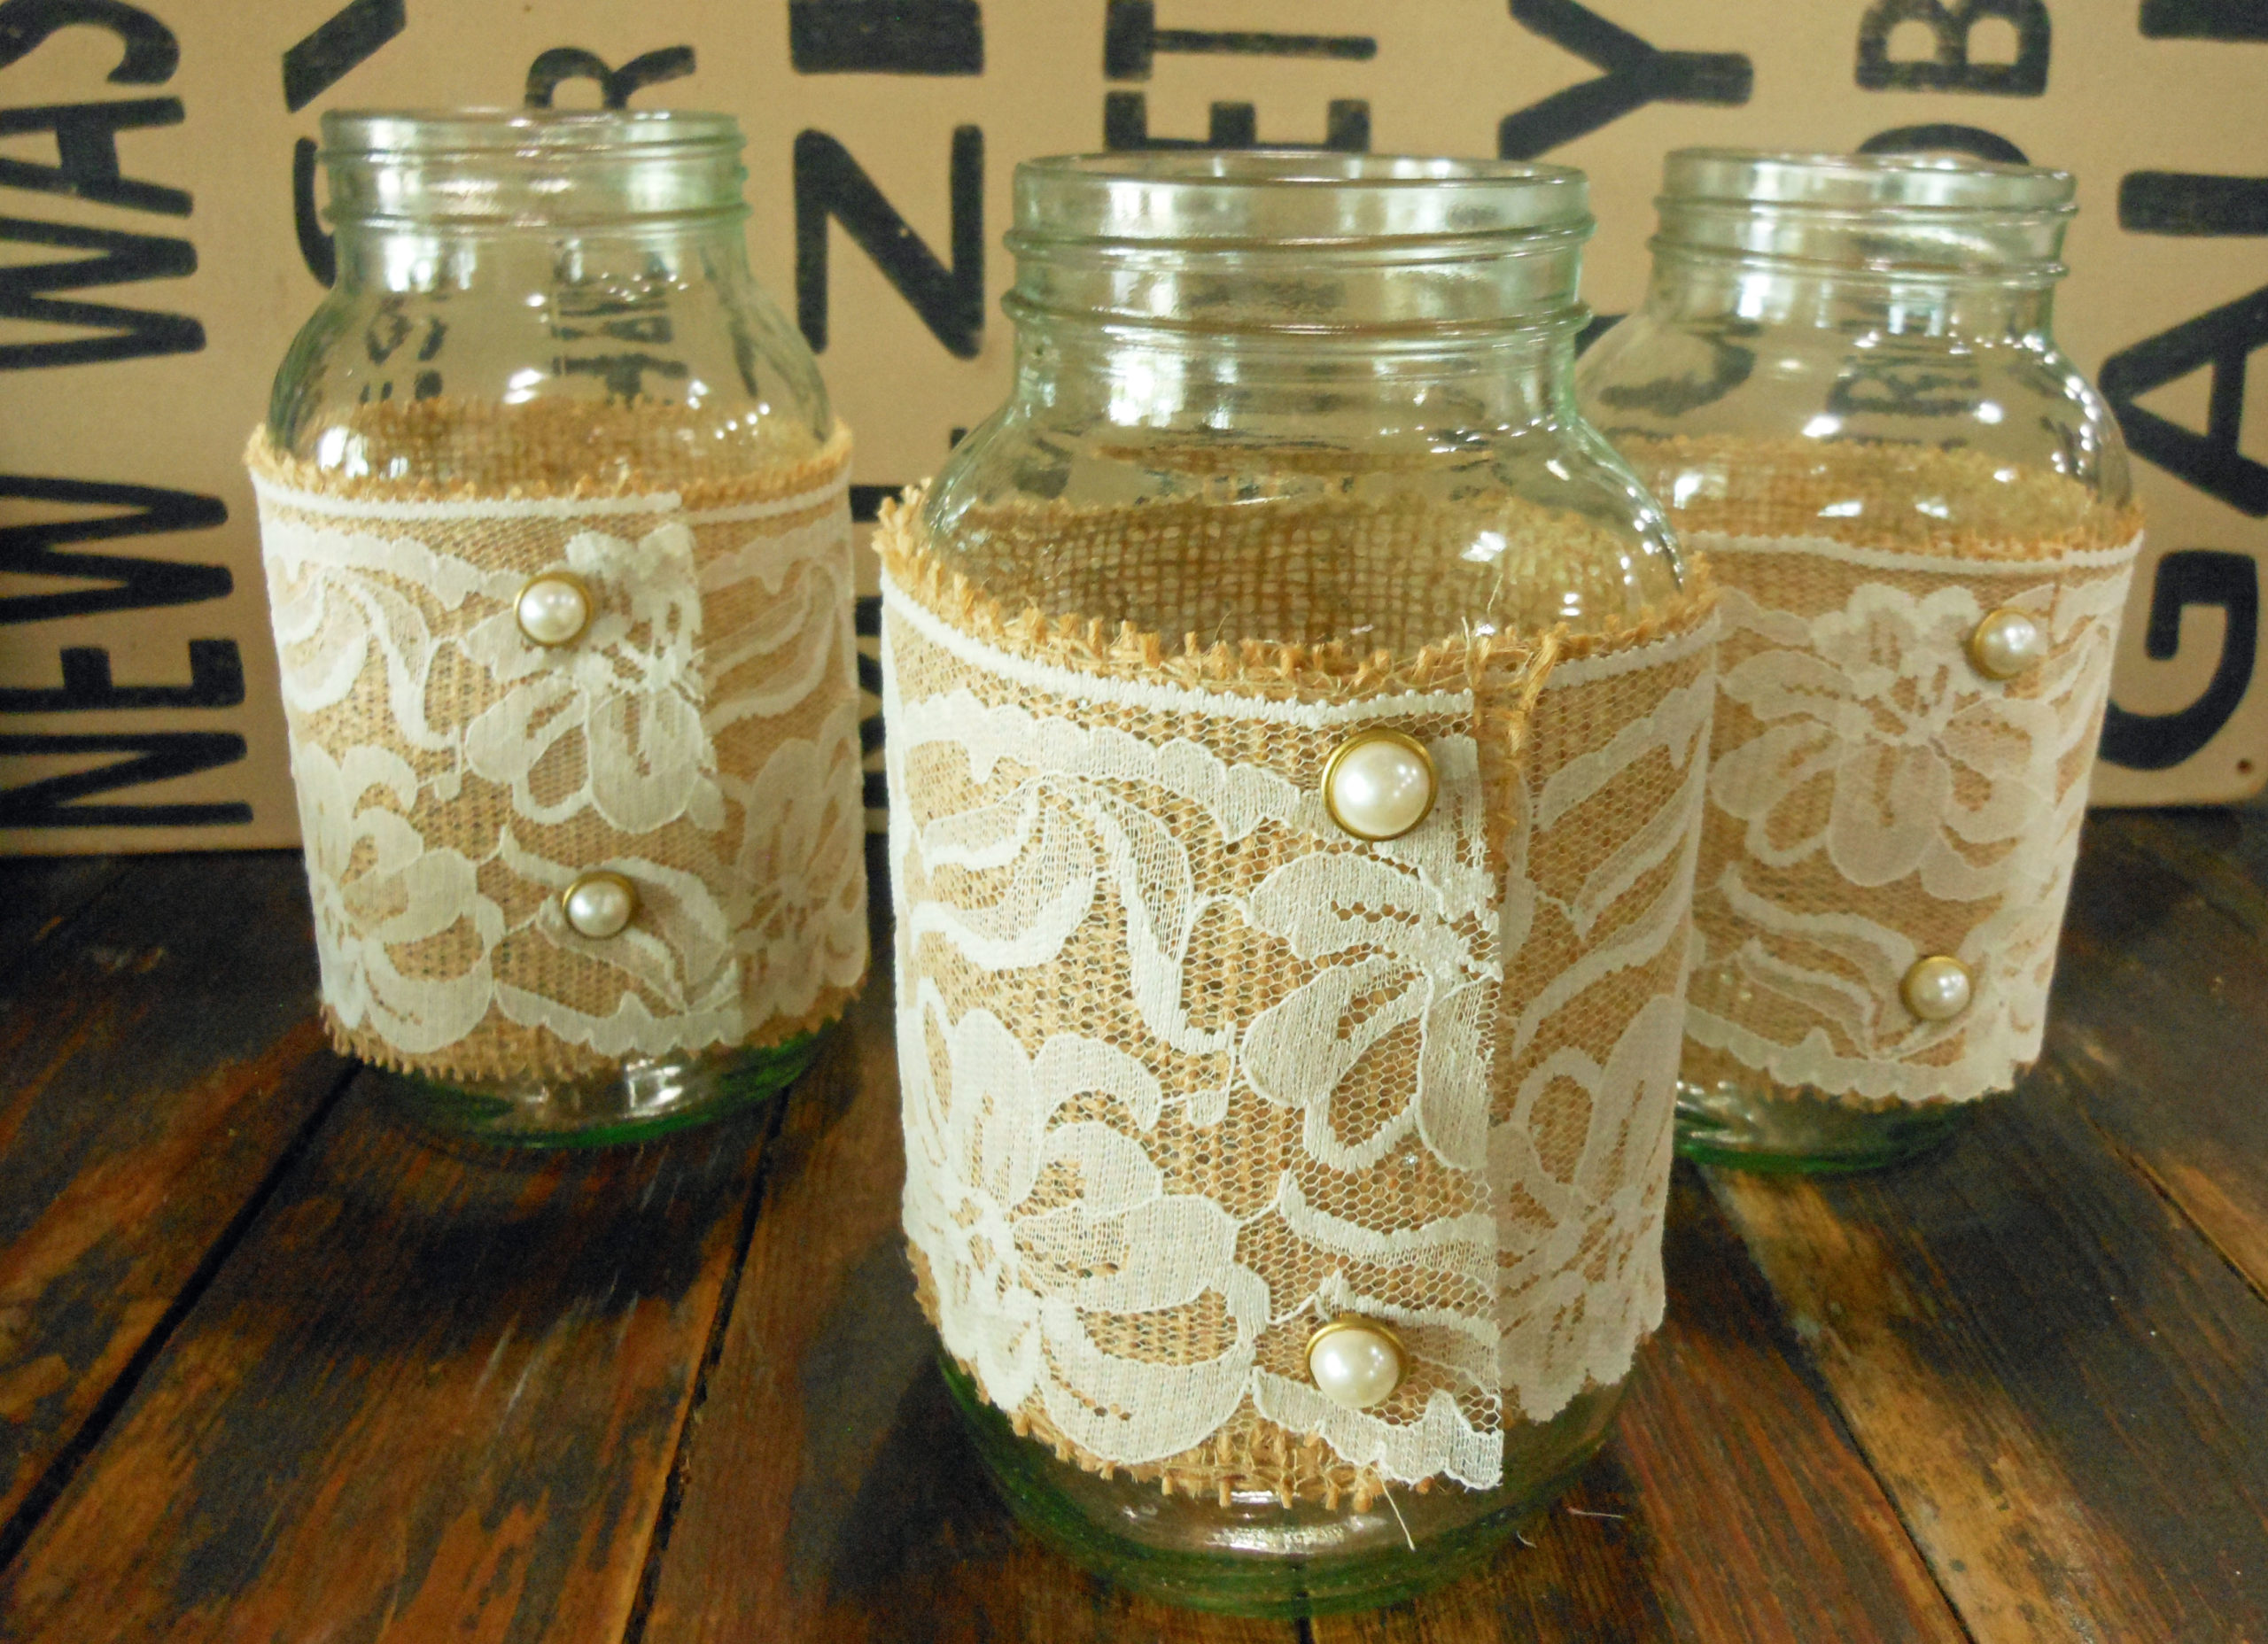 6 Natural 6 in Round Burlap and White Lace Jar Covers with Jute String